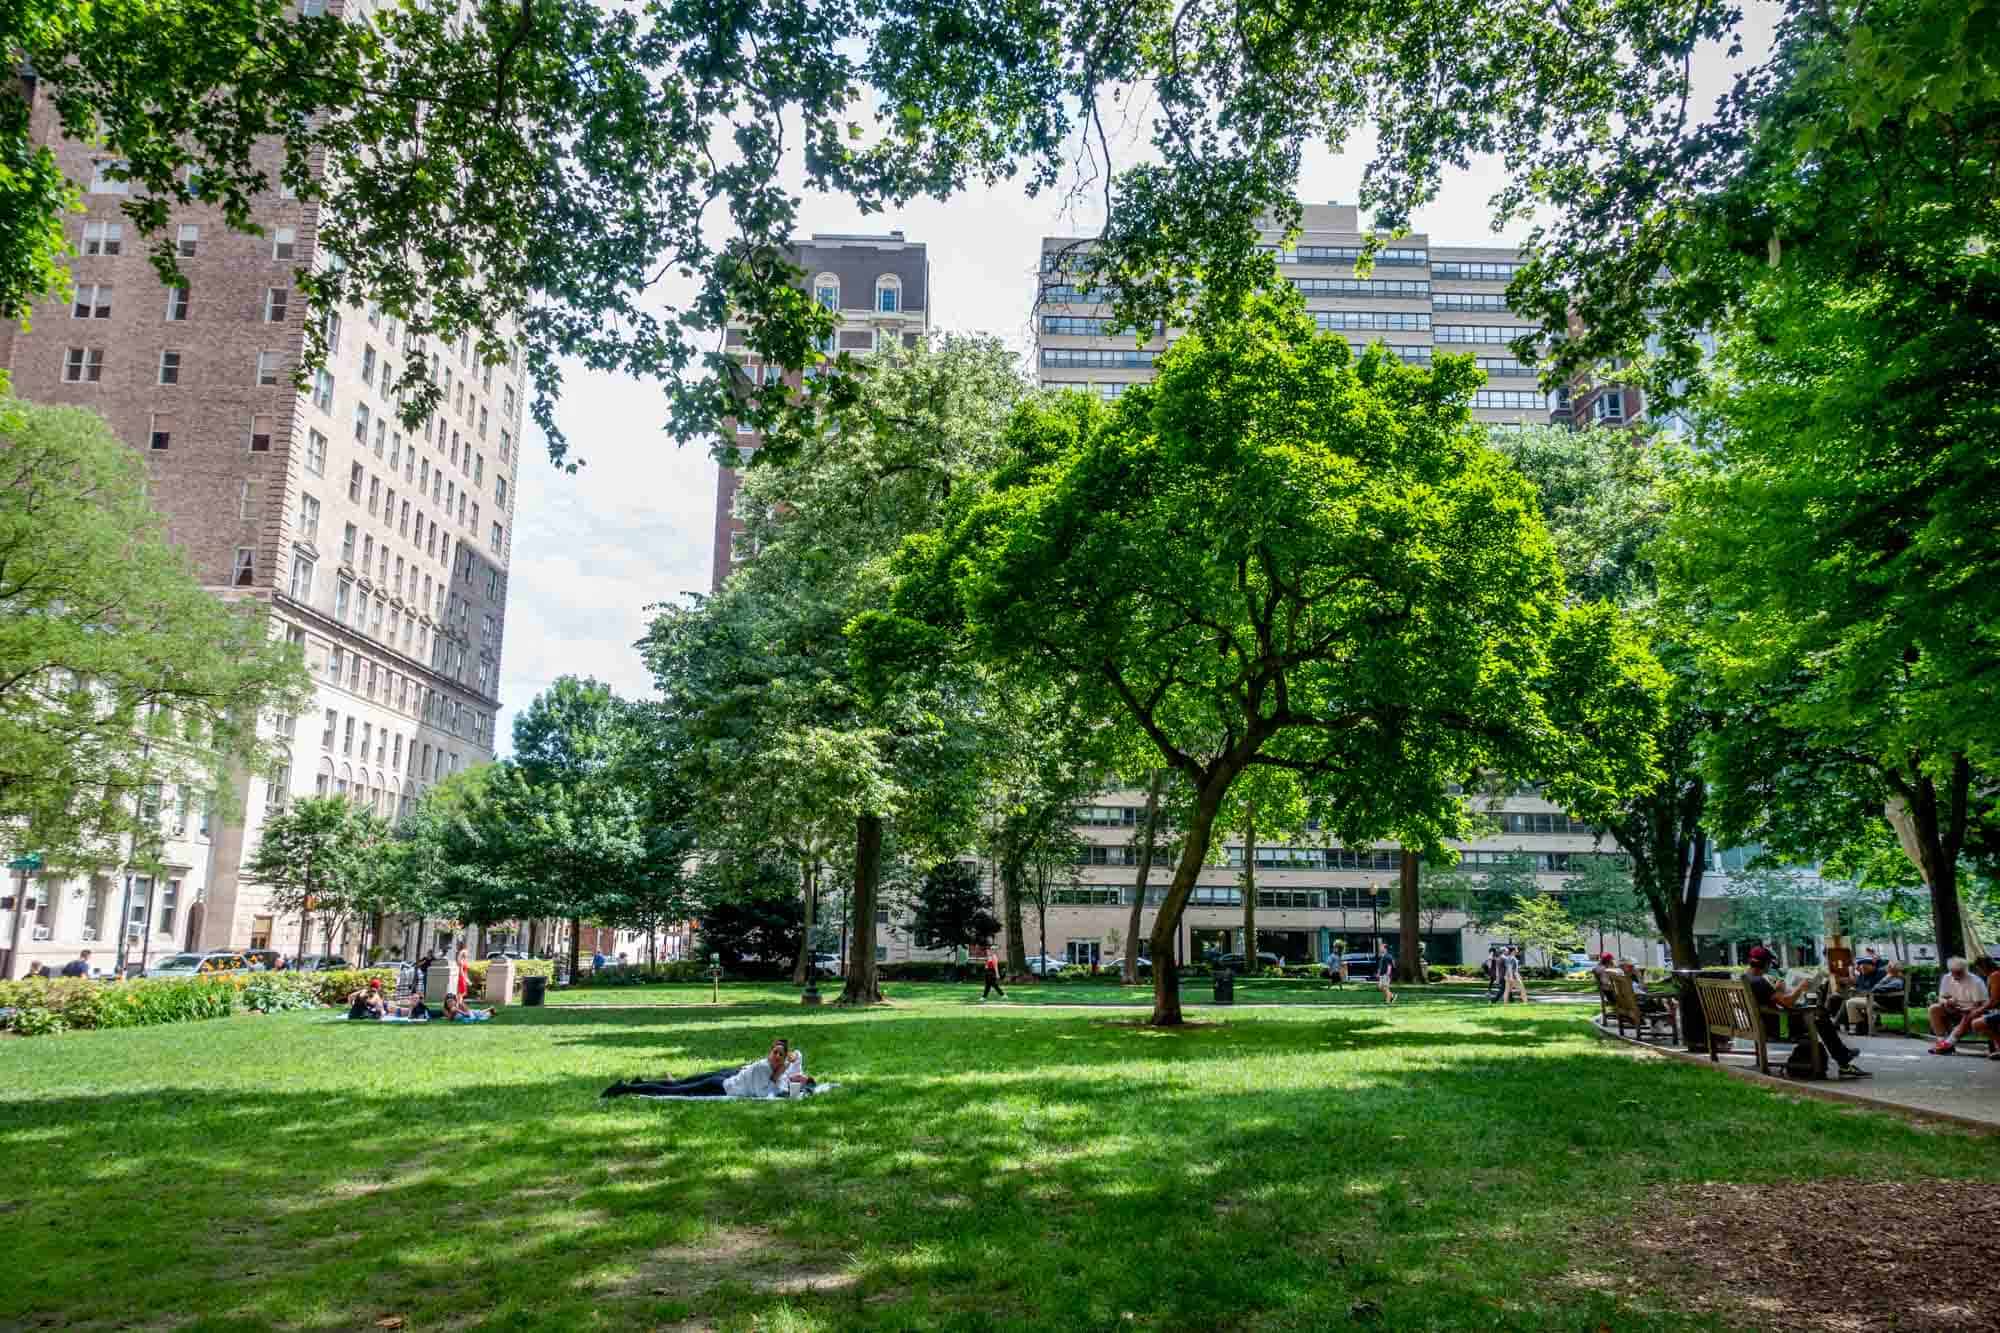 People relaxing in a city park surrounded by high-rise buildings.